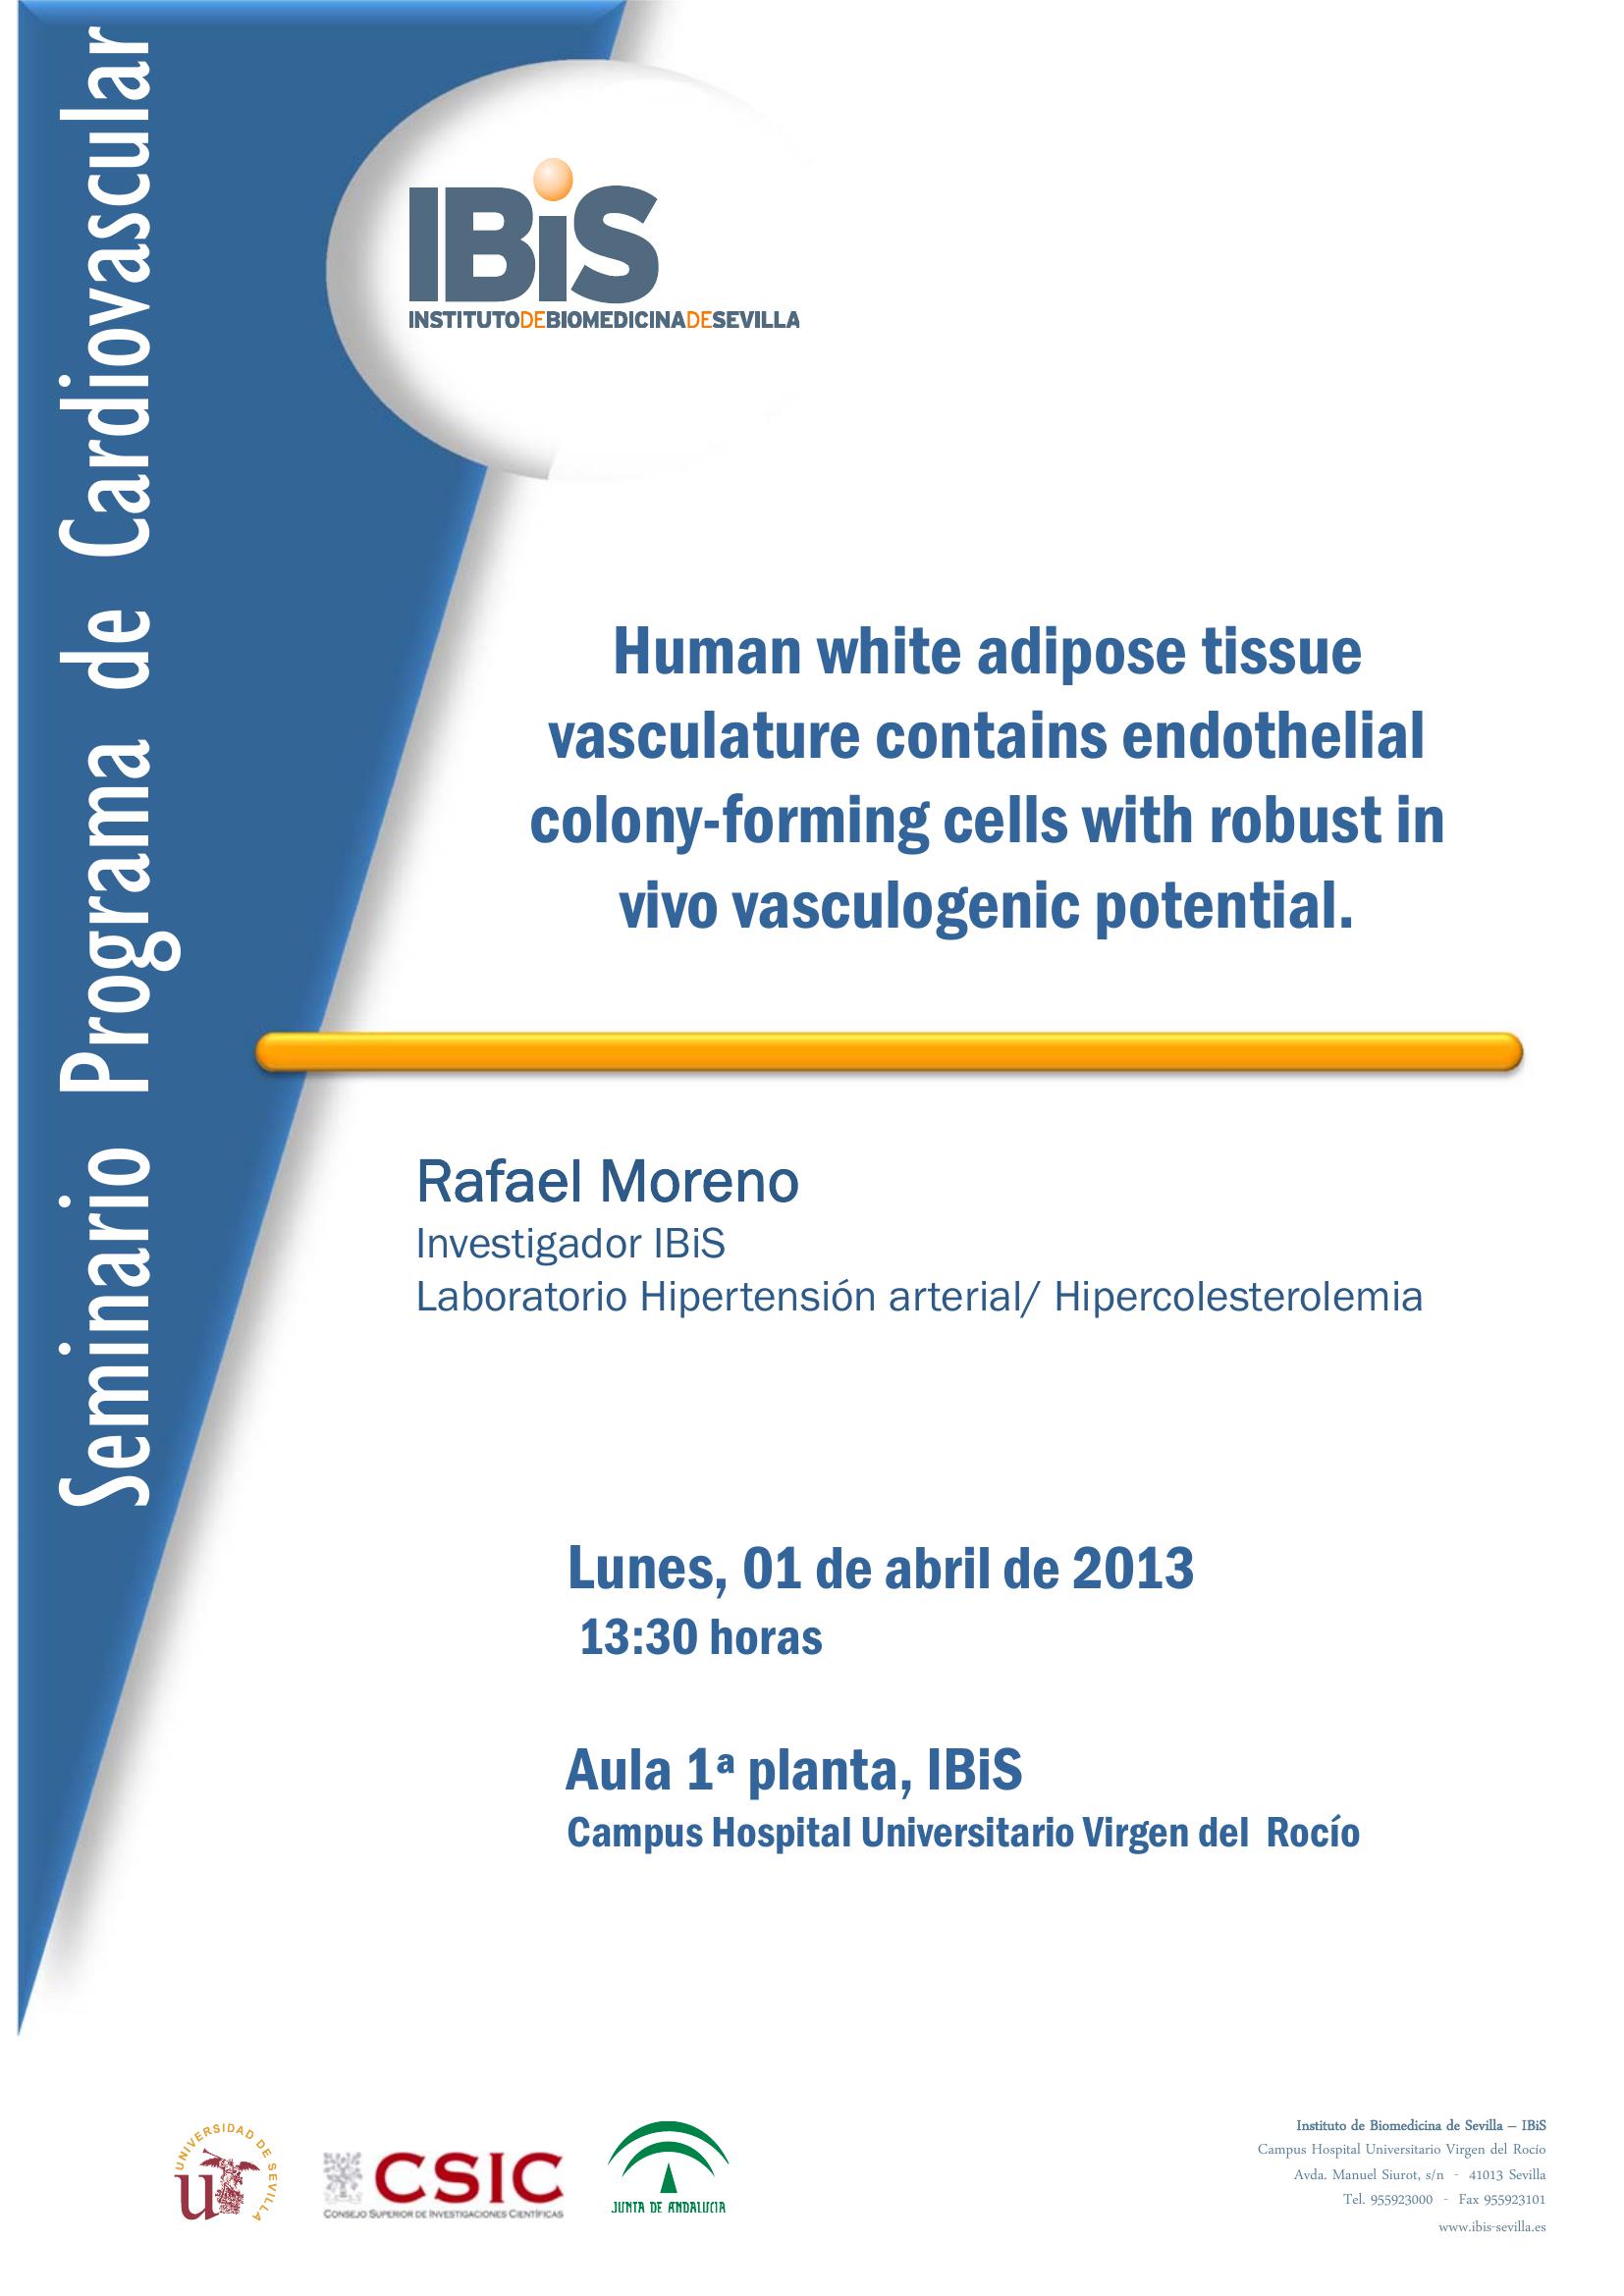 Poster: Human white adipose tissue vasculature contains endothelial colony-forming cells with robust in vivo vasculogenic potential.